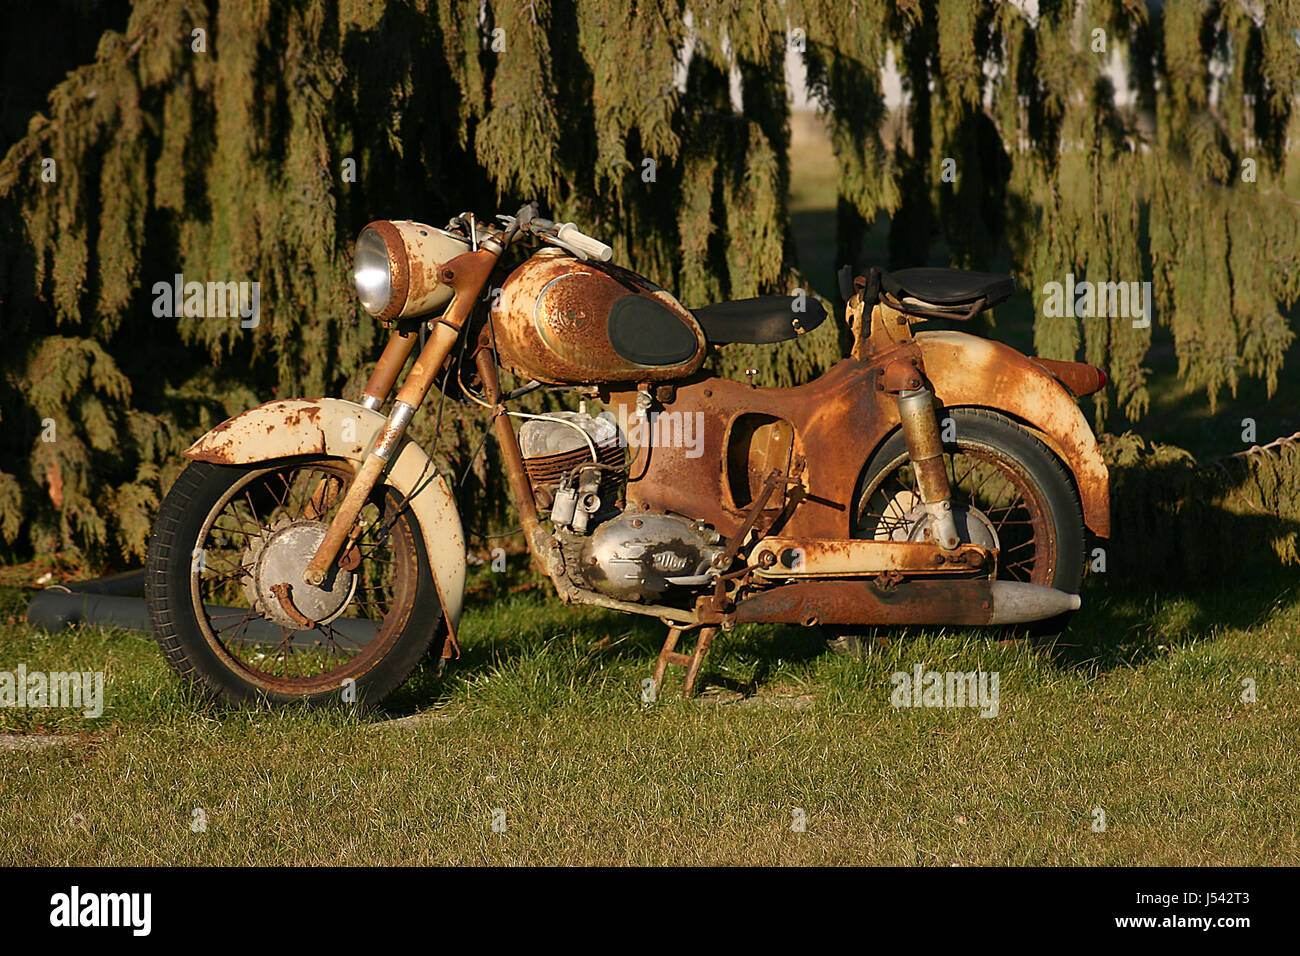 Puch Motorcycle High Resolution Stock Photography and Images - Alamy